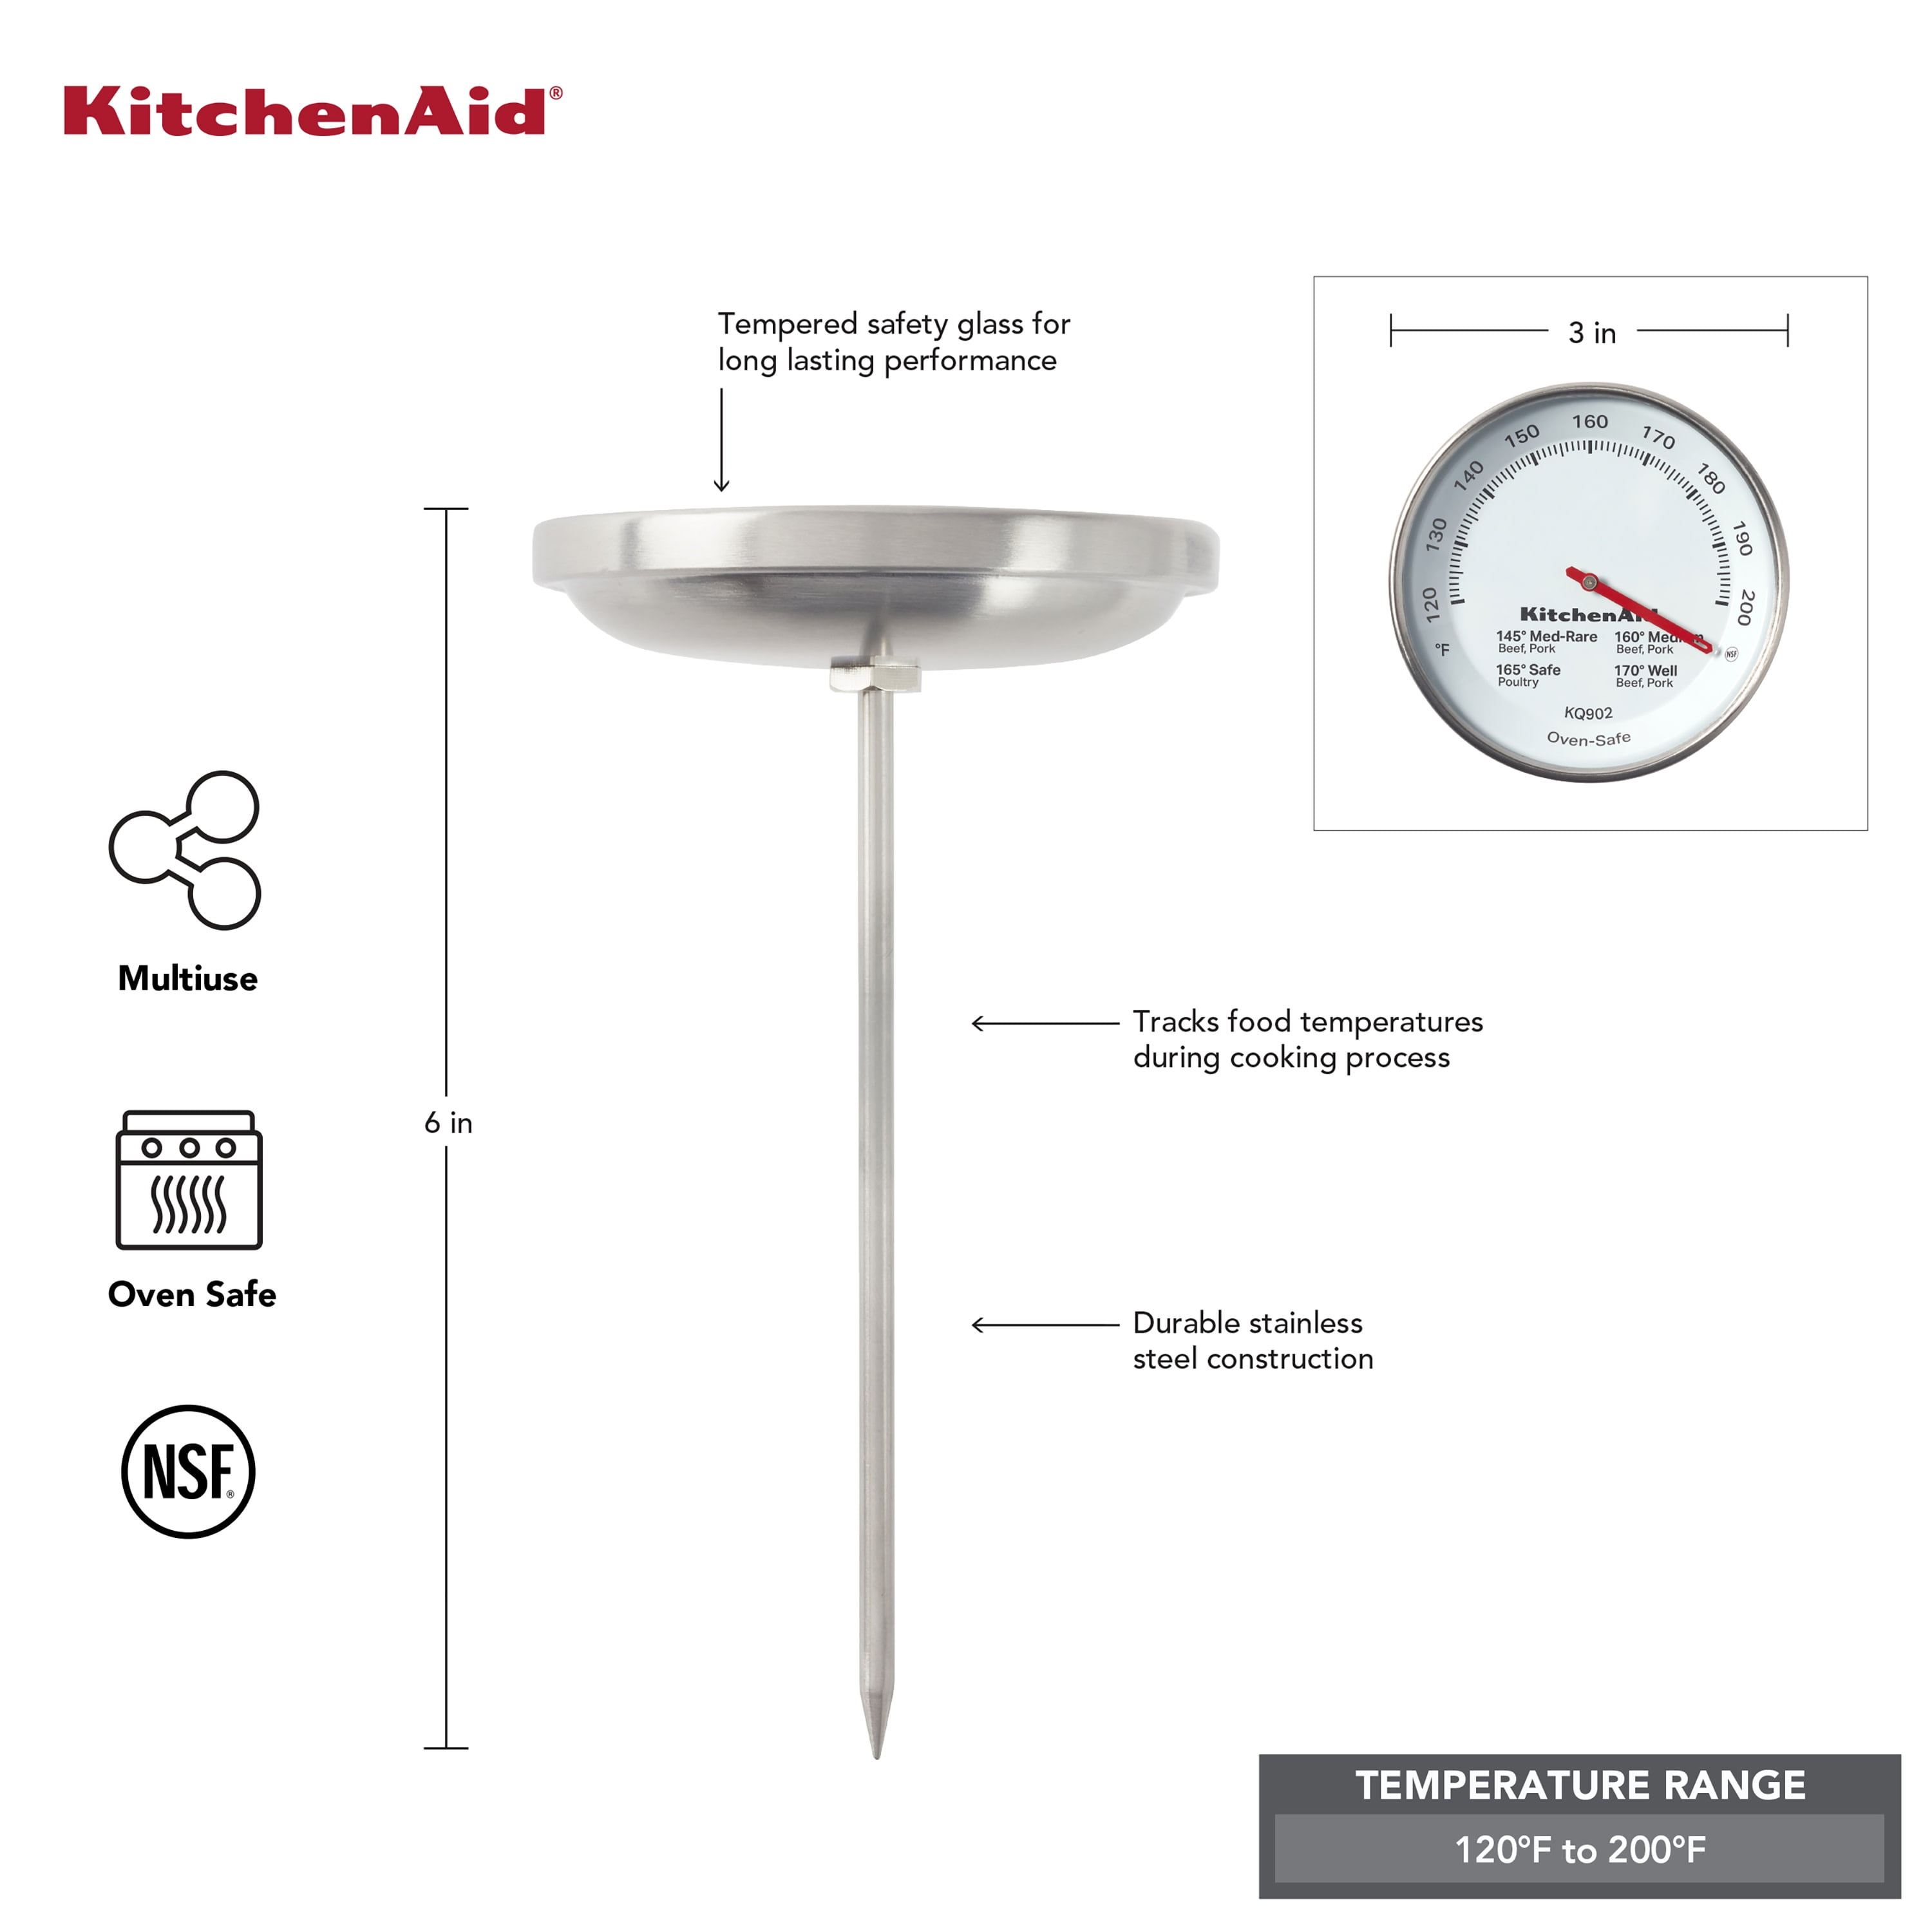 Food Network™ Analog Leave-In Meat Thermometer